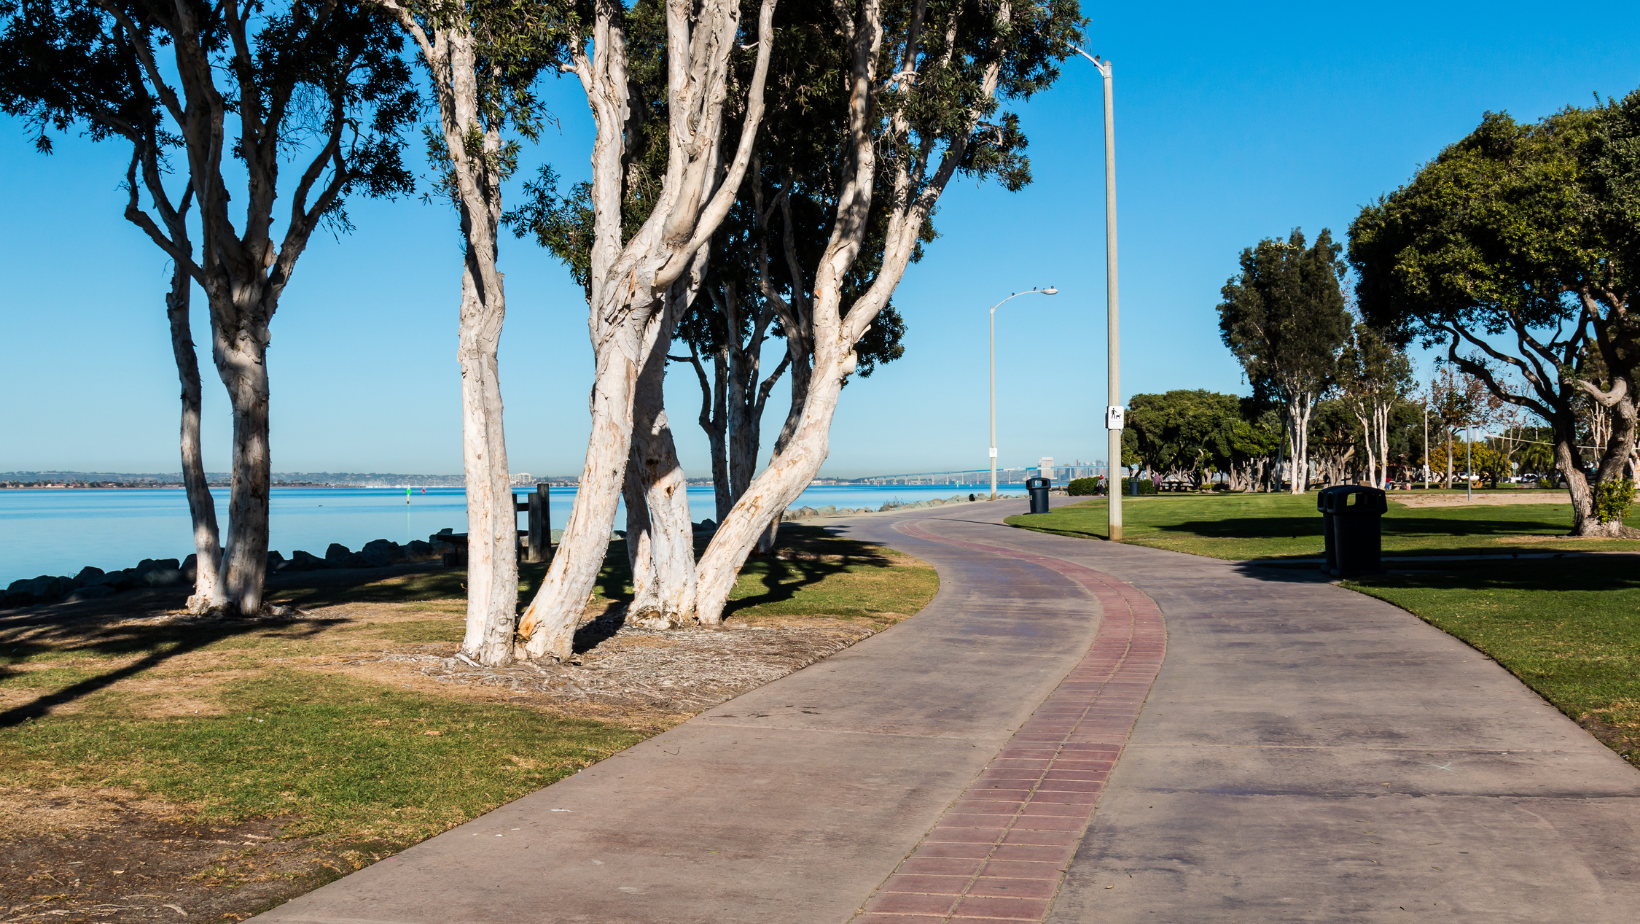 chula vista park with biking path and view of the ocean